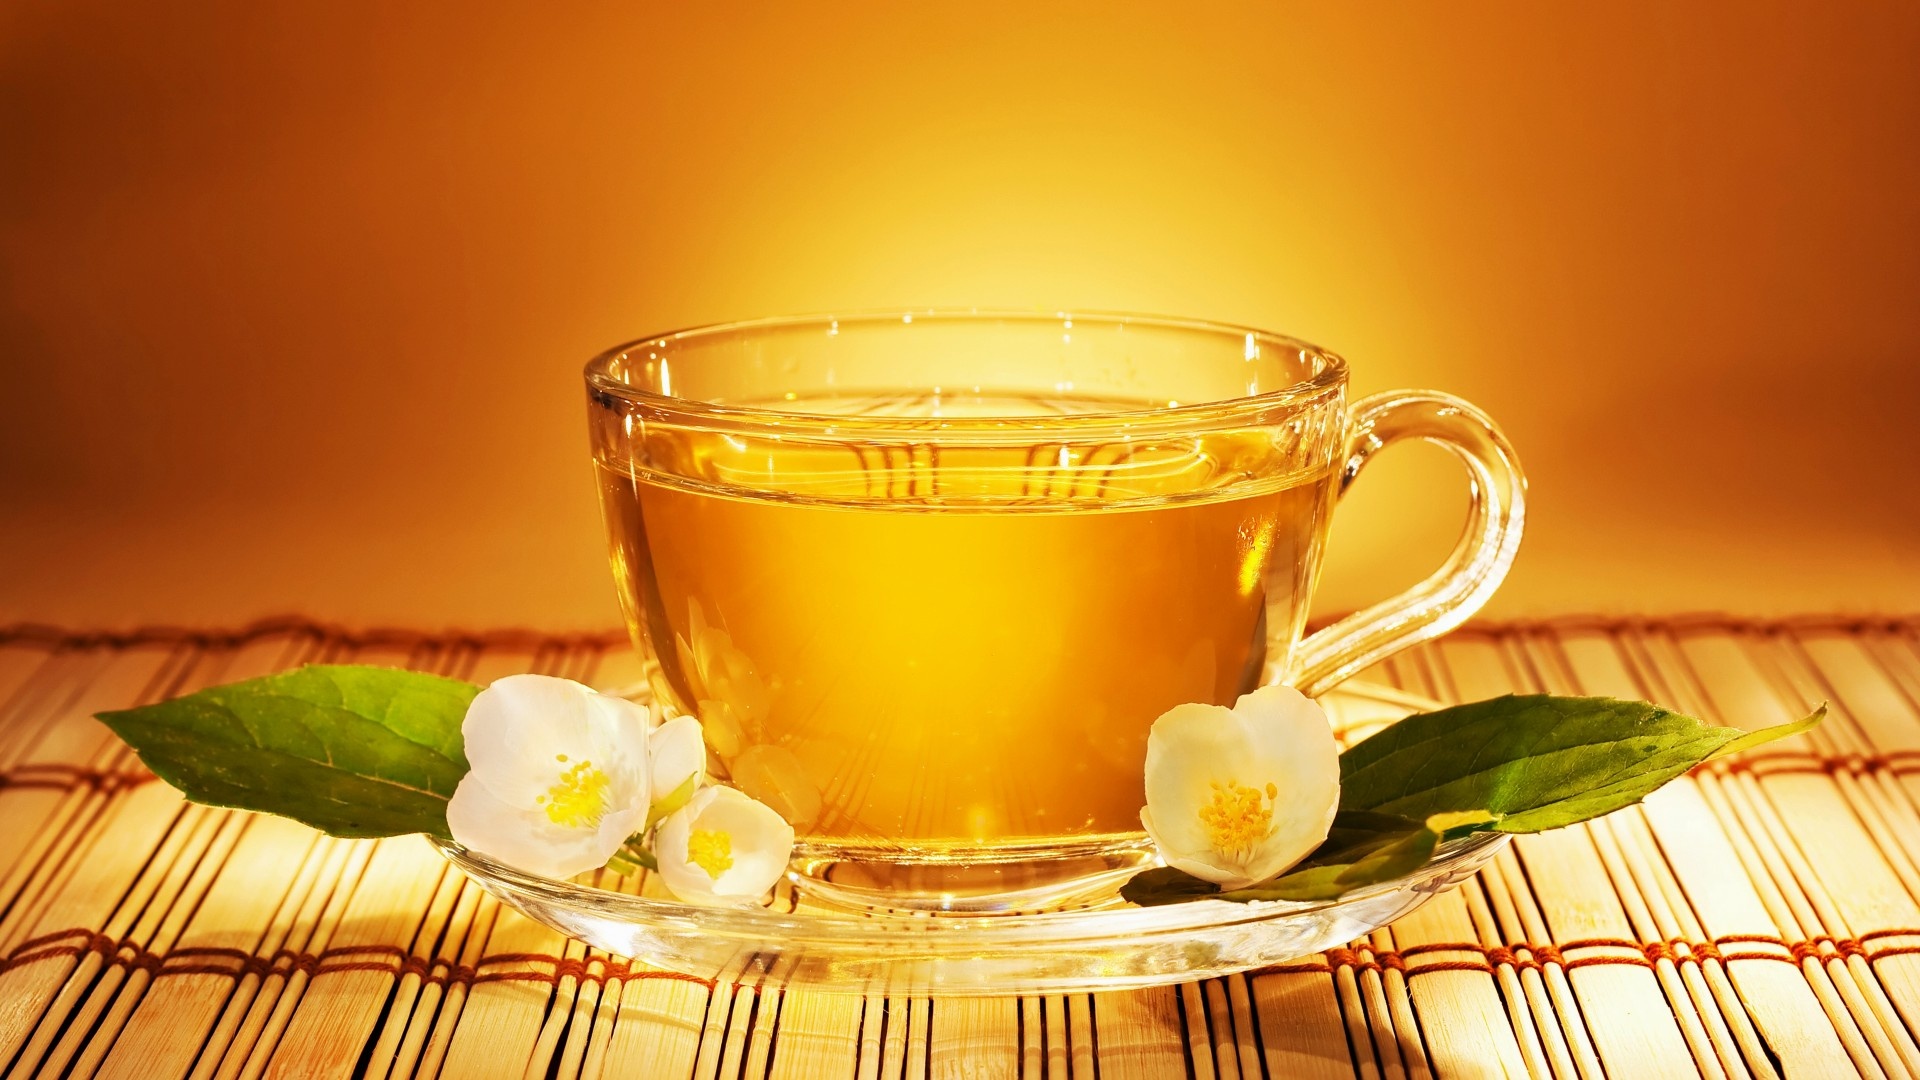 Tea: Tisane, Scented with the aroma of jasmine blossoms. 1920x1080 Full HD Wallpaper.